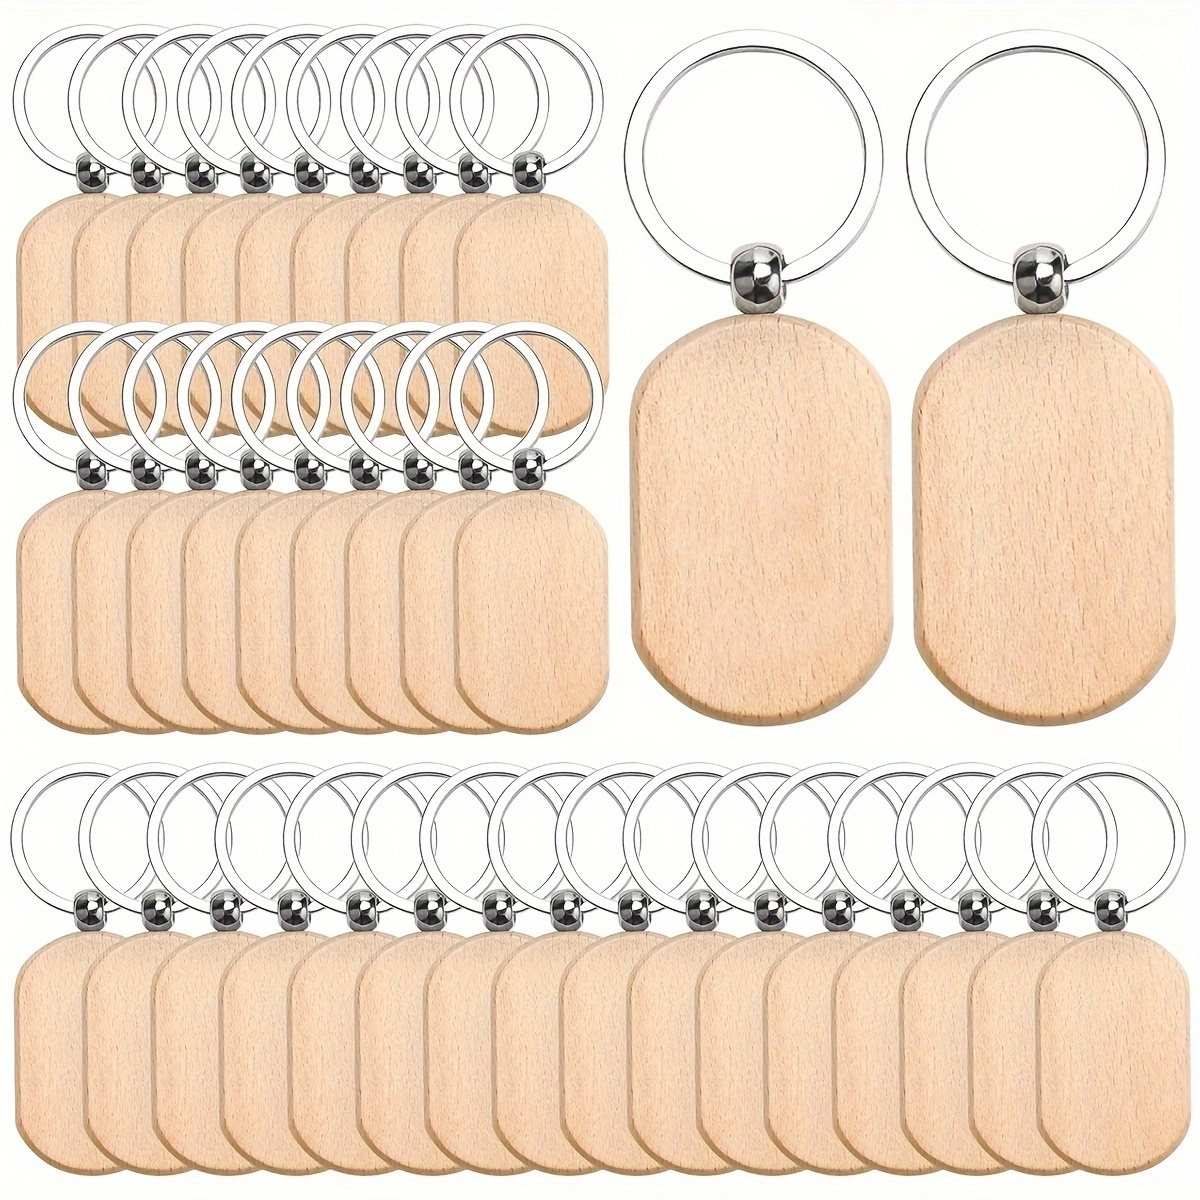 

15-pack Unfinished Wood Keychains - Diy Blank Tags For Laser Engraving, Jewelry Crafts & Christmas Gifts